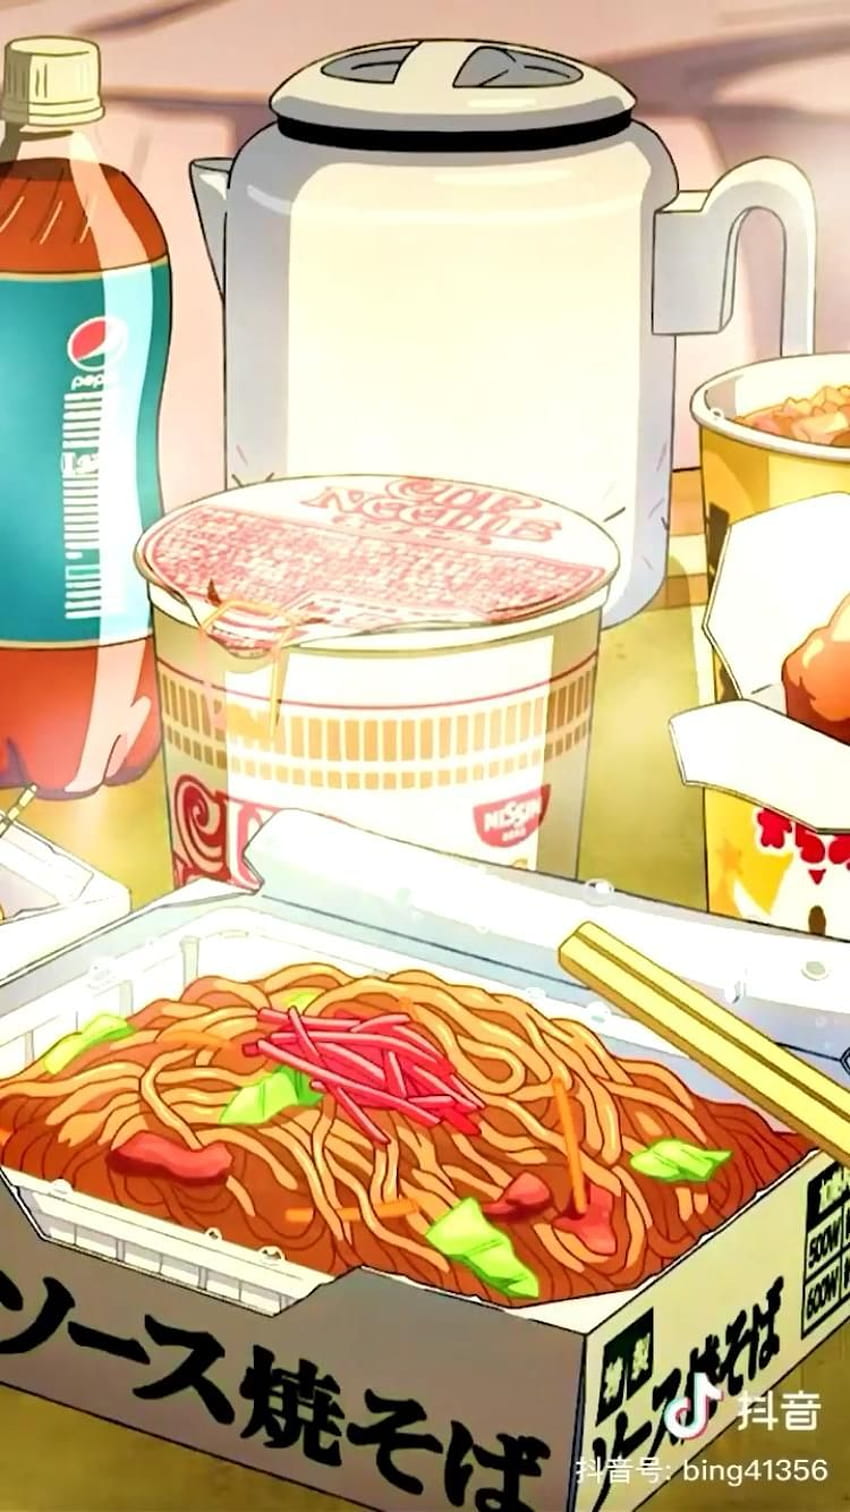 Lexica - Vintage anime screenshotof girl from Ponyo, 90's anime aesthetic.  she in her kitchen dreaming about a noodles